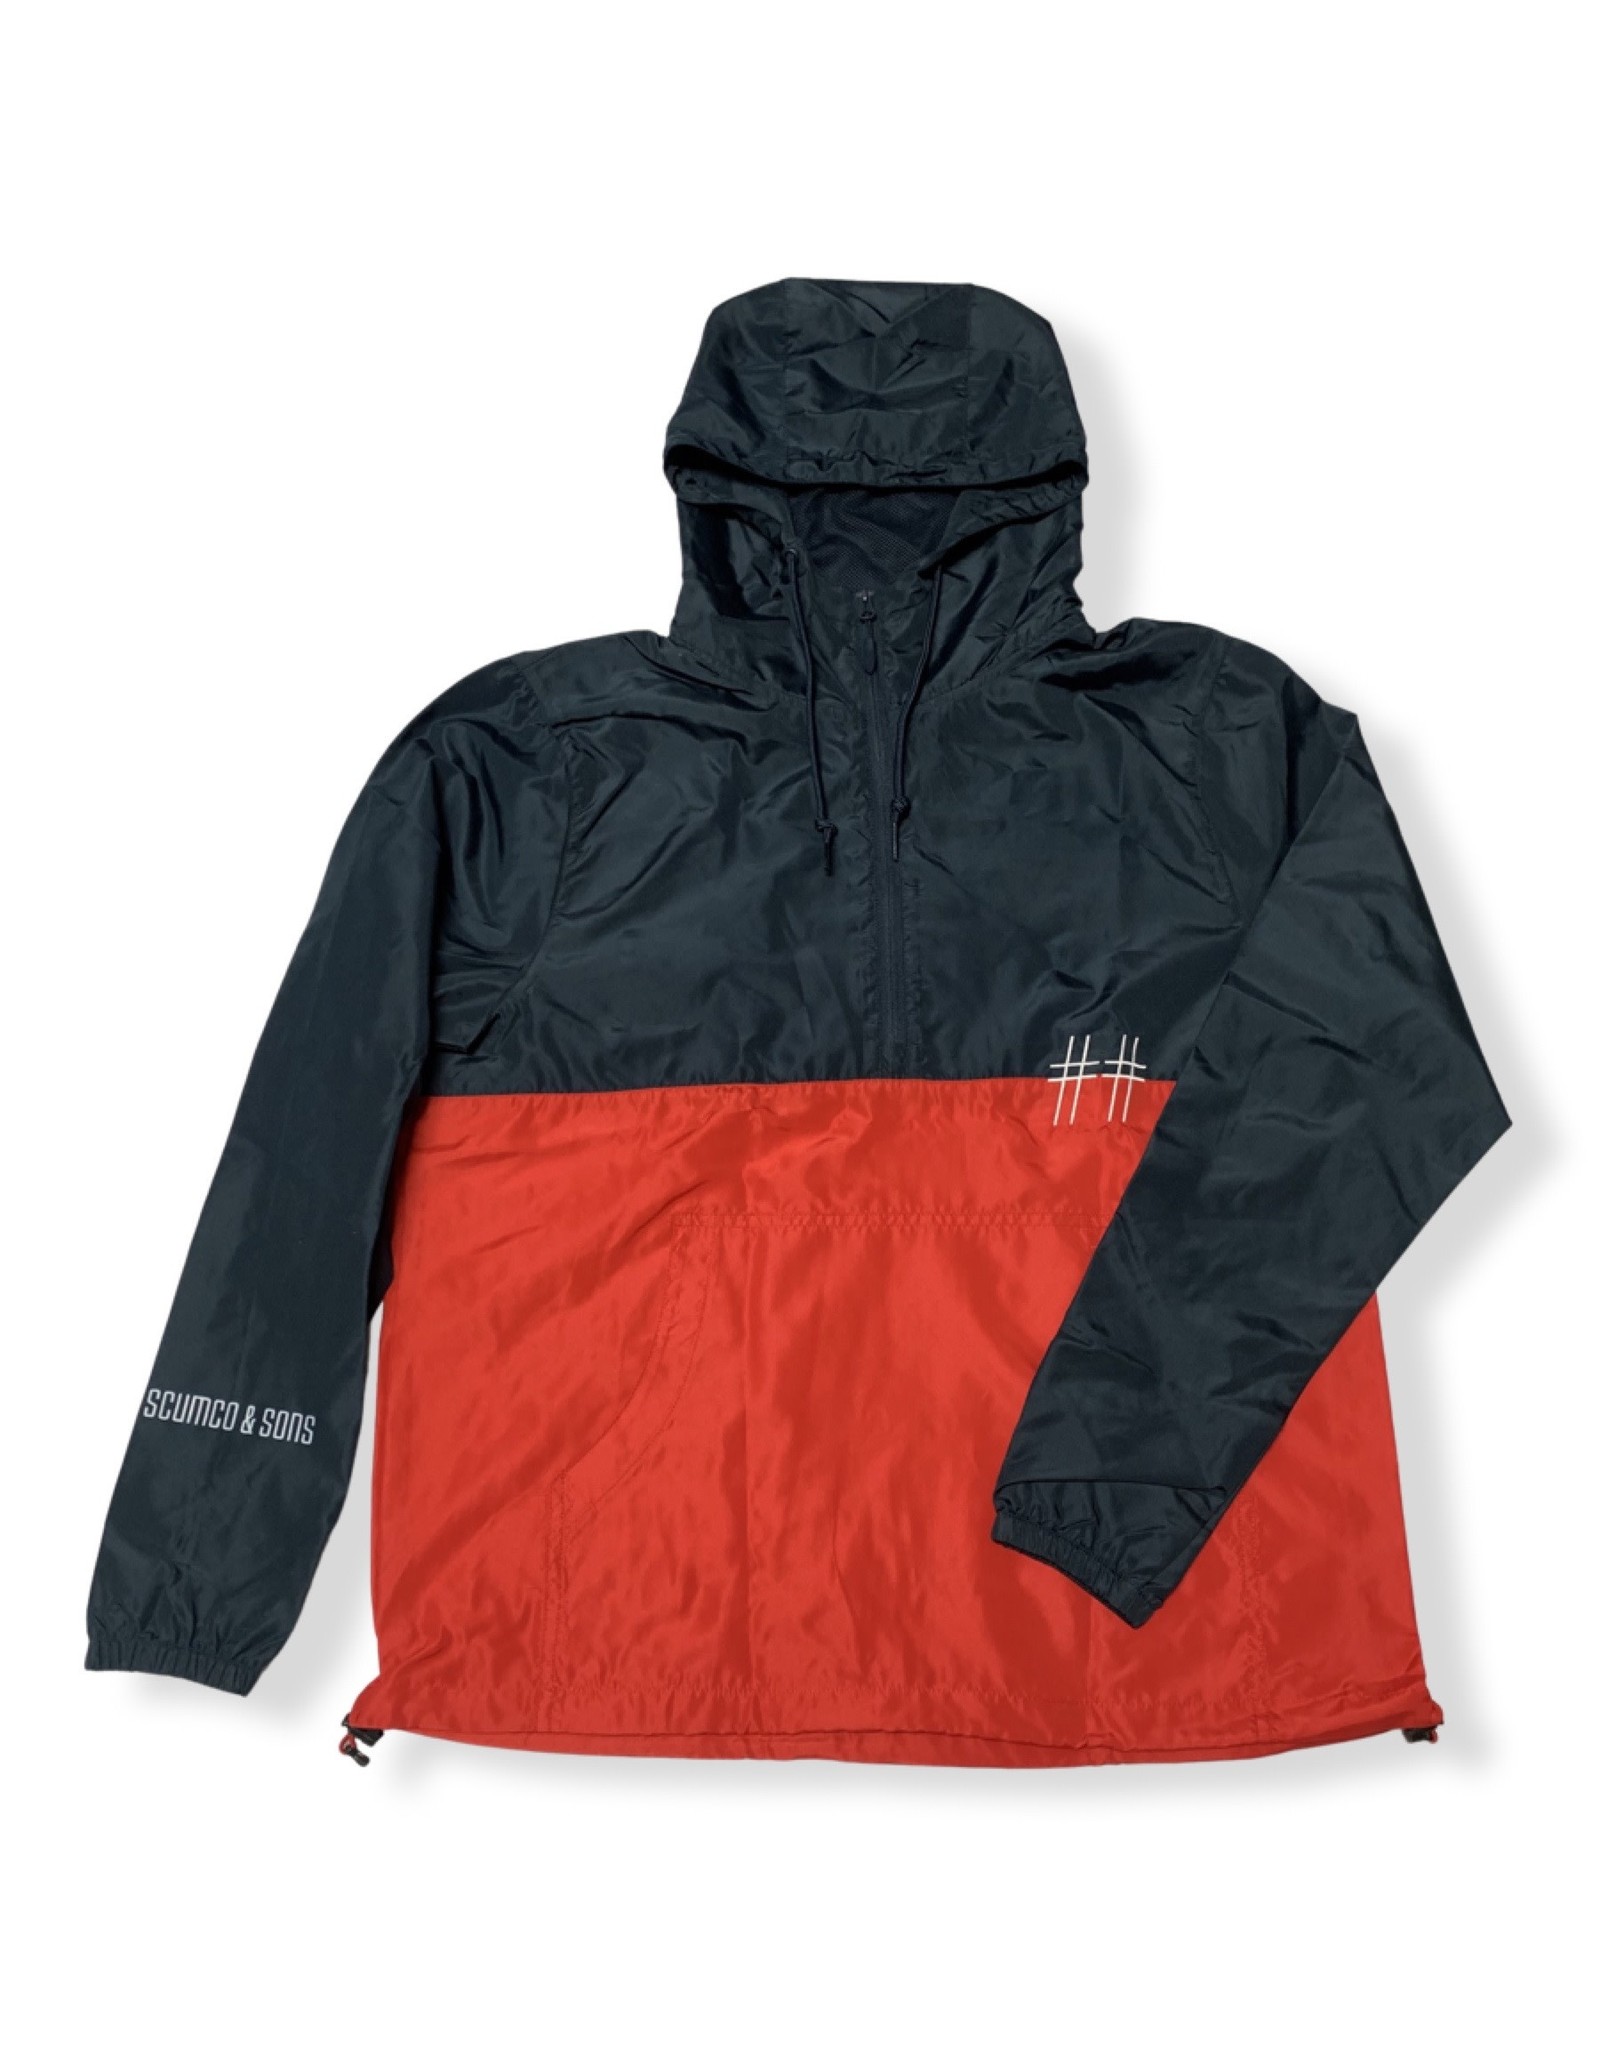 Scumco & Sons Scumco And Sons Jacket Hellfiger Half Zip Pullover (Navy/Red)